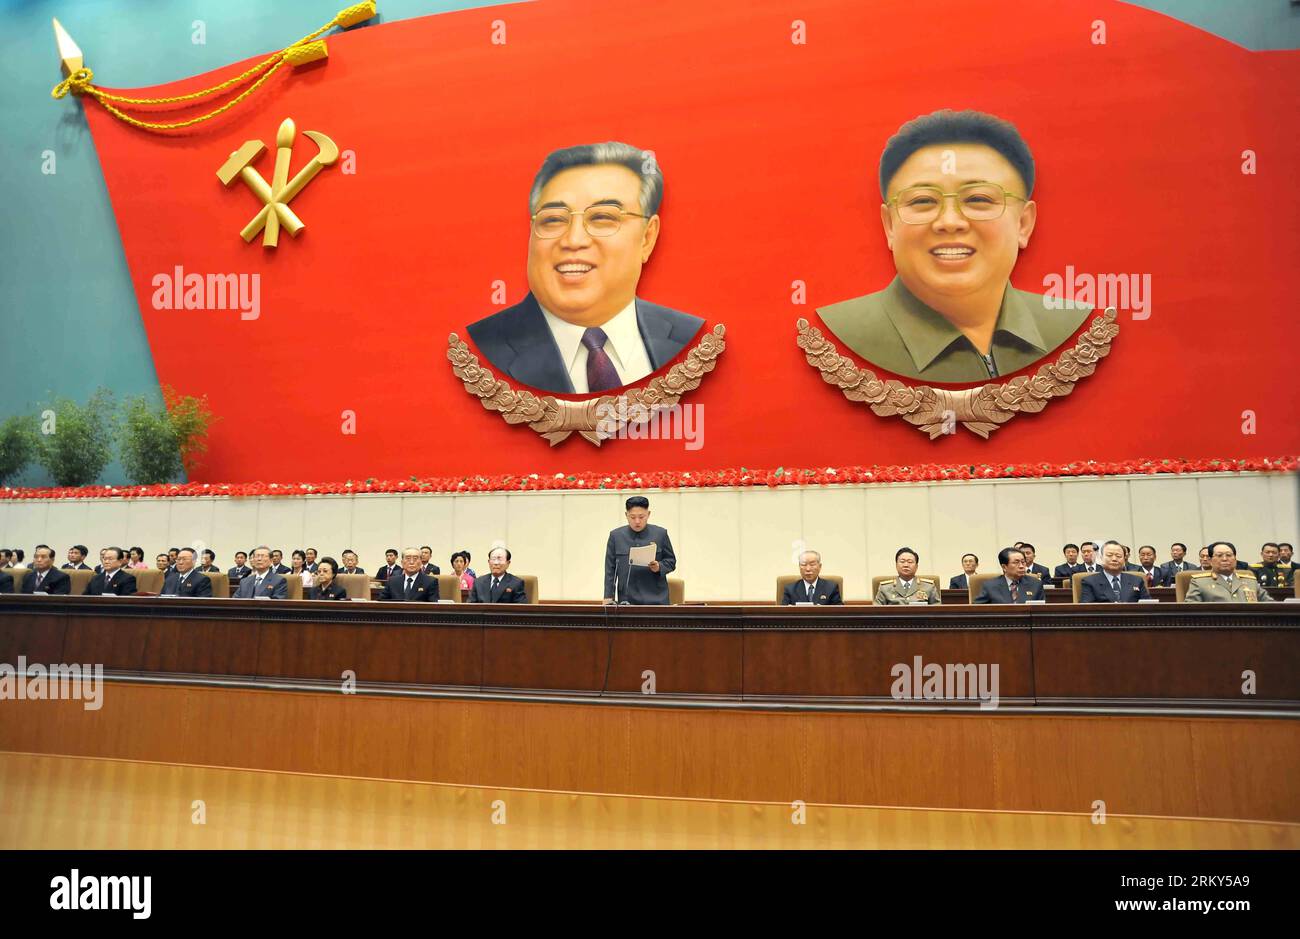 Bildnummer: 59147251  Datum: 29.01.2013  Copyright: imago/Xinhua (130129) -- PYONGYANG, Jan. 29, 2013 (Xinhua) -- This photo provided by KCNA on Jan. 29, 2013 shows Kim Jong Un, first secretary of the Workers Party of Korea (WPK) delivers an opening speech at the Fourth Meeting of Secretaries of Cells of the WPK in Pyongyang, the Democratic People s Republic of Korea (DPRK), on Jan. 28, 2013. The grassroots leaders meeting of the WPK, which opened Monday, was attended by around 10,000 cadres from across the country, the official KCNA news agency reported Tuesday. (Xinhua/KCNA) (dtf) DPRK-PYONG Stock Photo